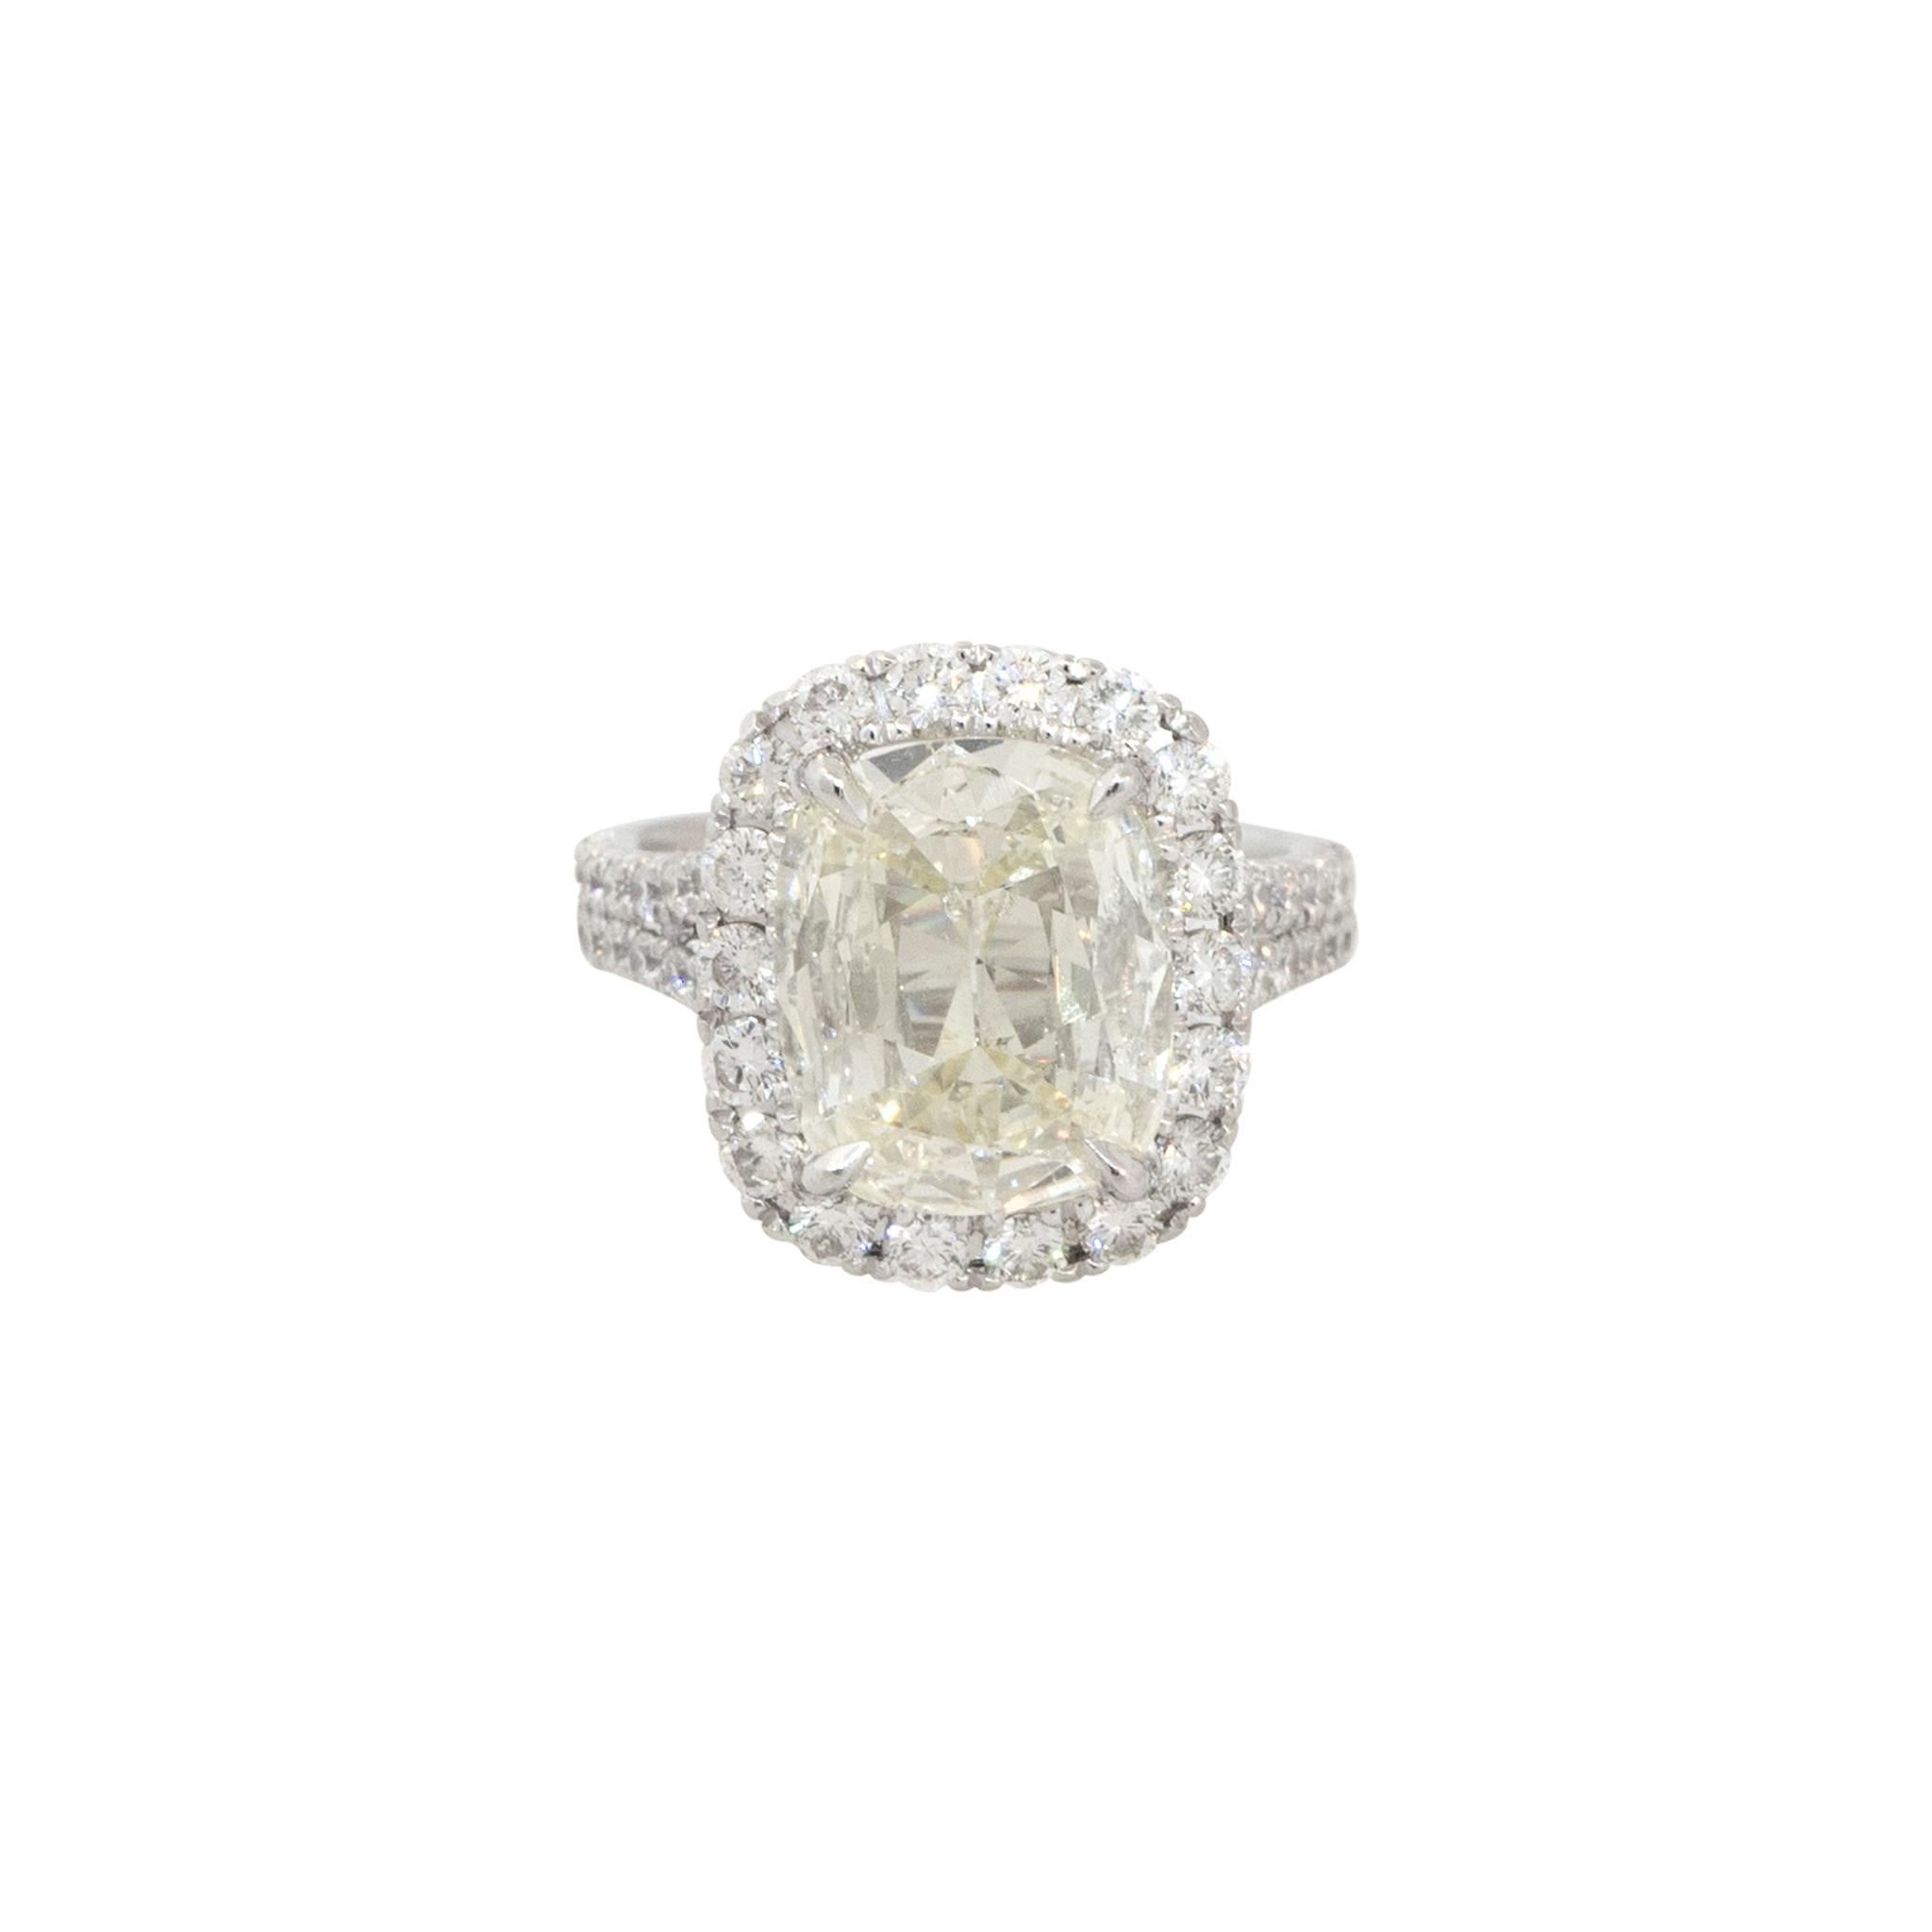 Platinum 4.64ctw Cushion Cut Diamond Halo Engagement Ring
Material: Platinum
Diamond Details: Approx. 3.59ctw Cushion Cut Diamond. Center Diamond is L in color and SI1 in clarity
Mounting Details: Approx. 1.05ctw of Round Brilliant Cut Diamonds.